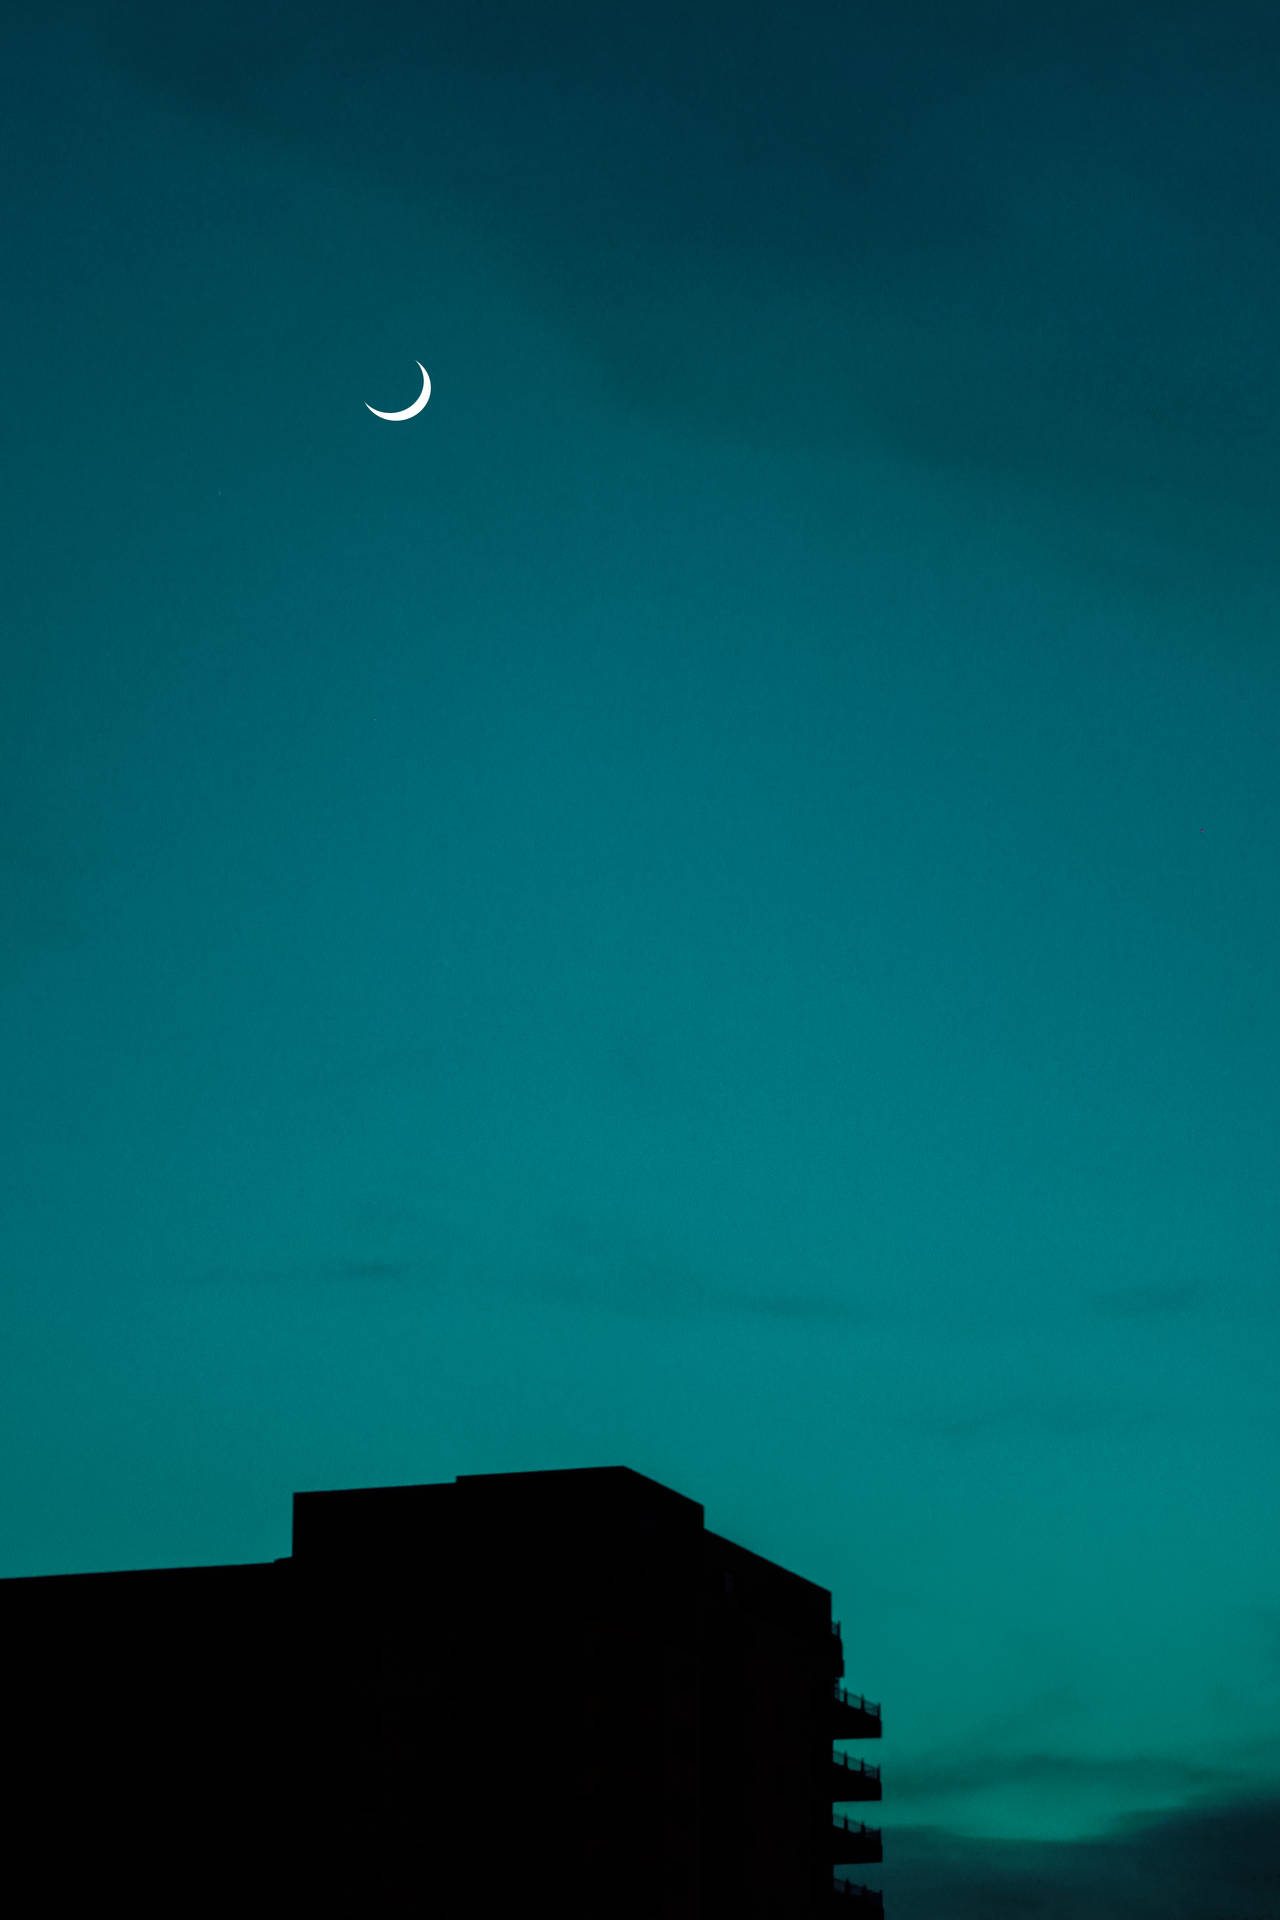 Moon And Teal Sky Background